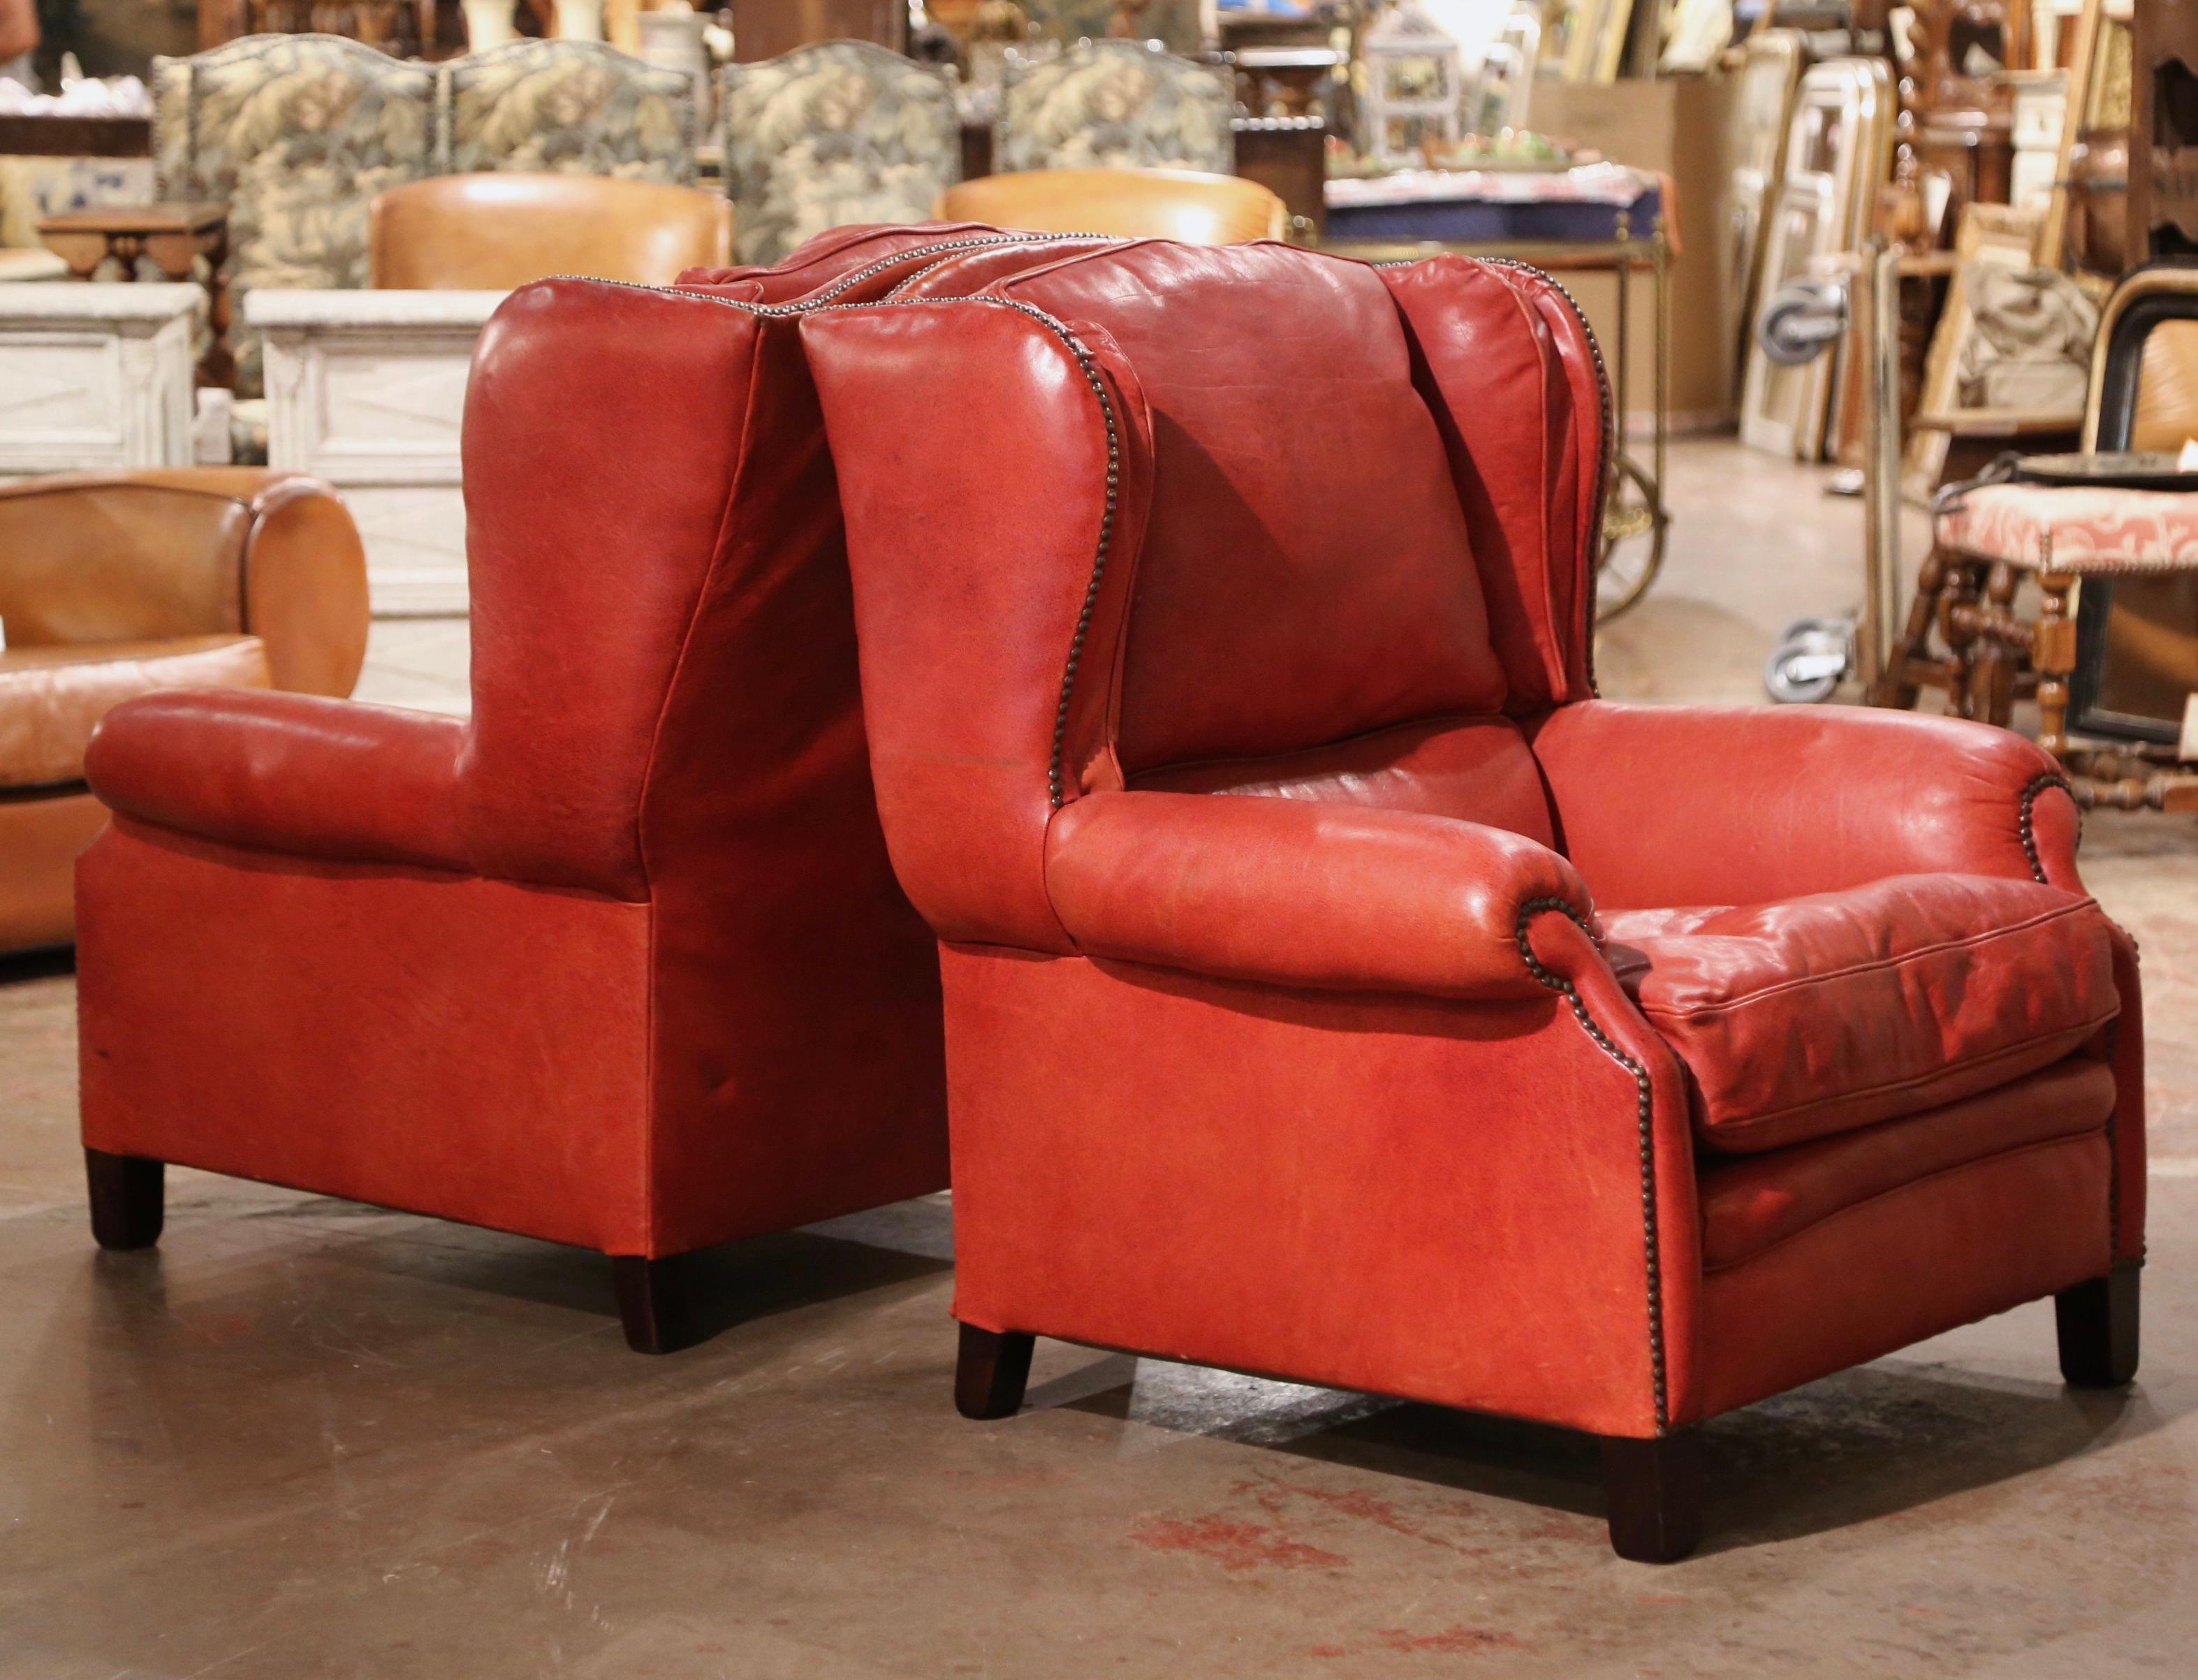 Pair of Mid-Century French Red Leather Wing Back Club Armchairs with Nail Heads For Sale 2